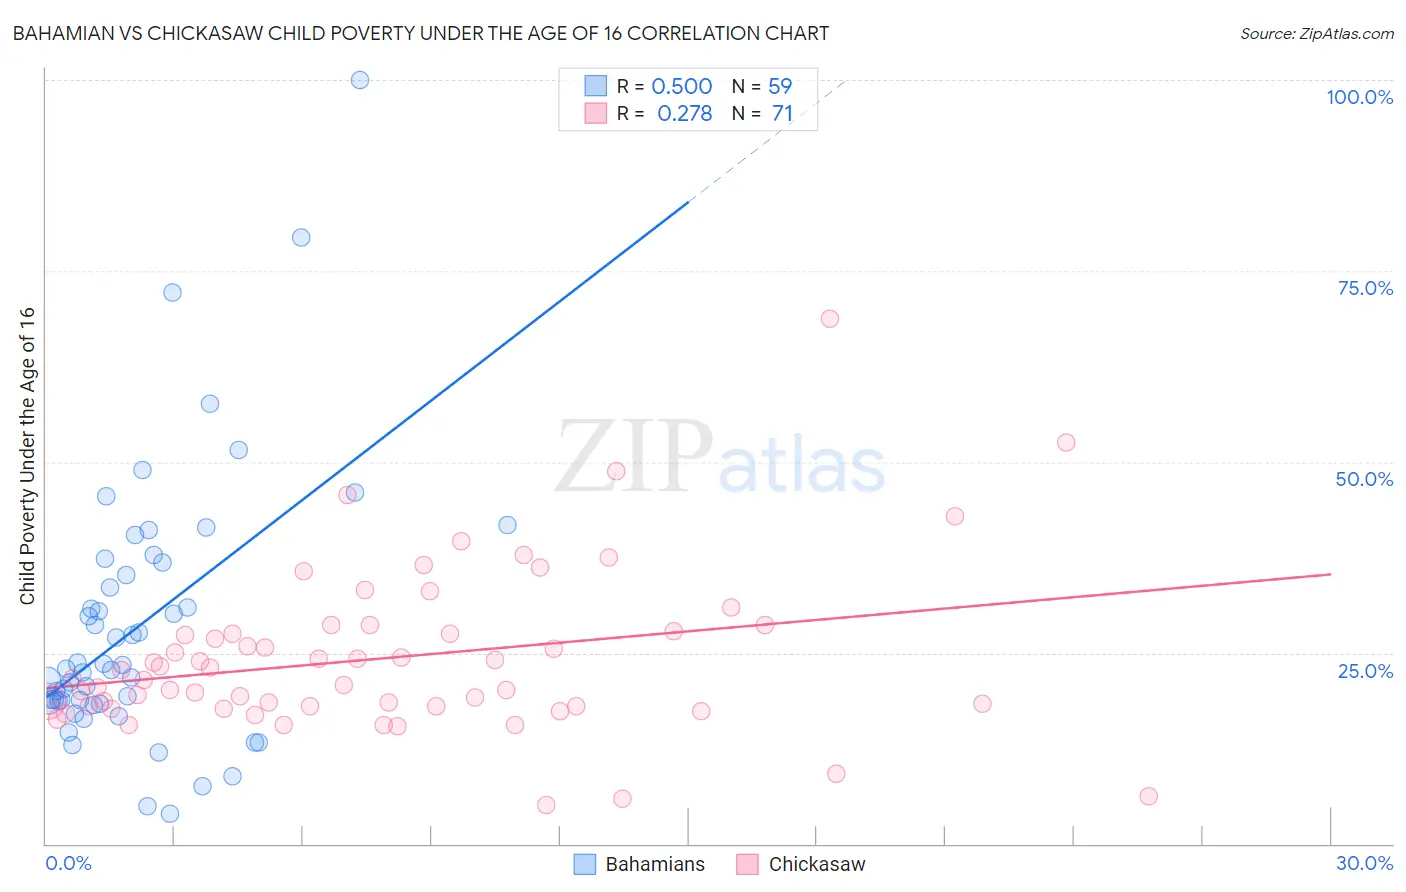 Bahamian vs Chickasaw Child Poverty Under the Age of 16